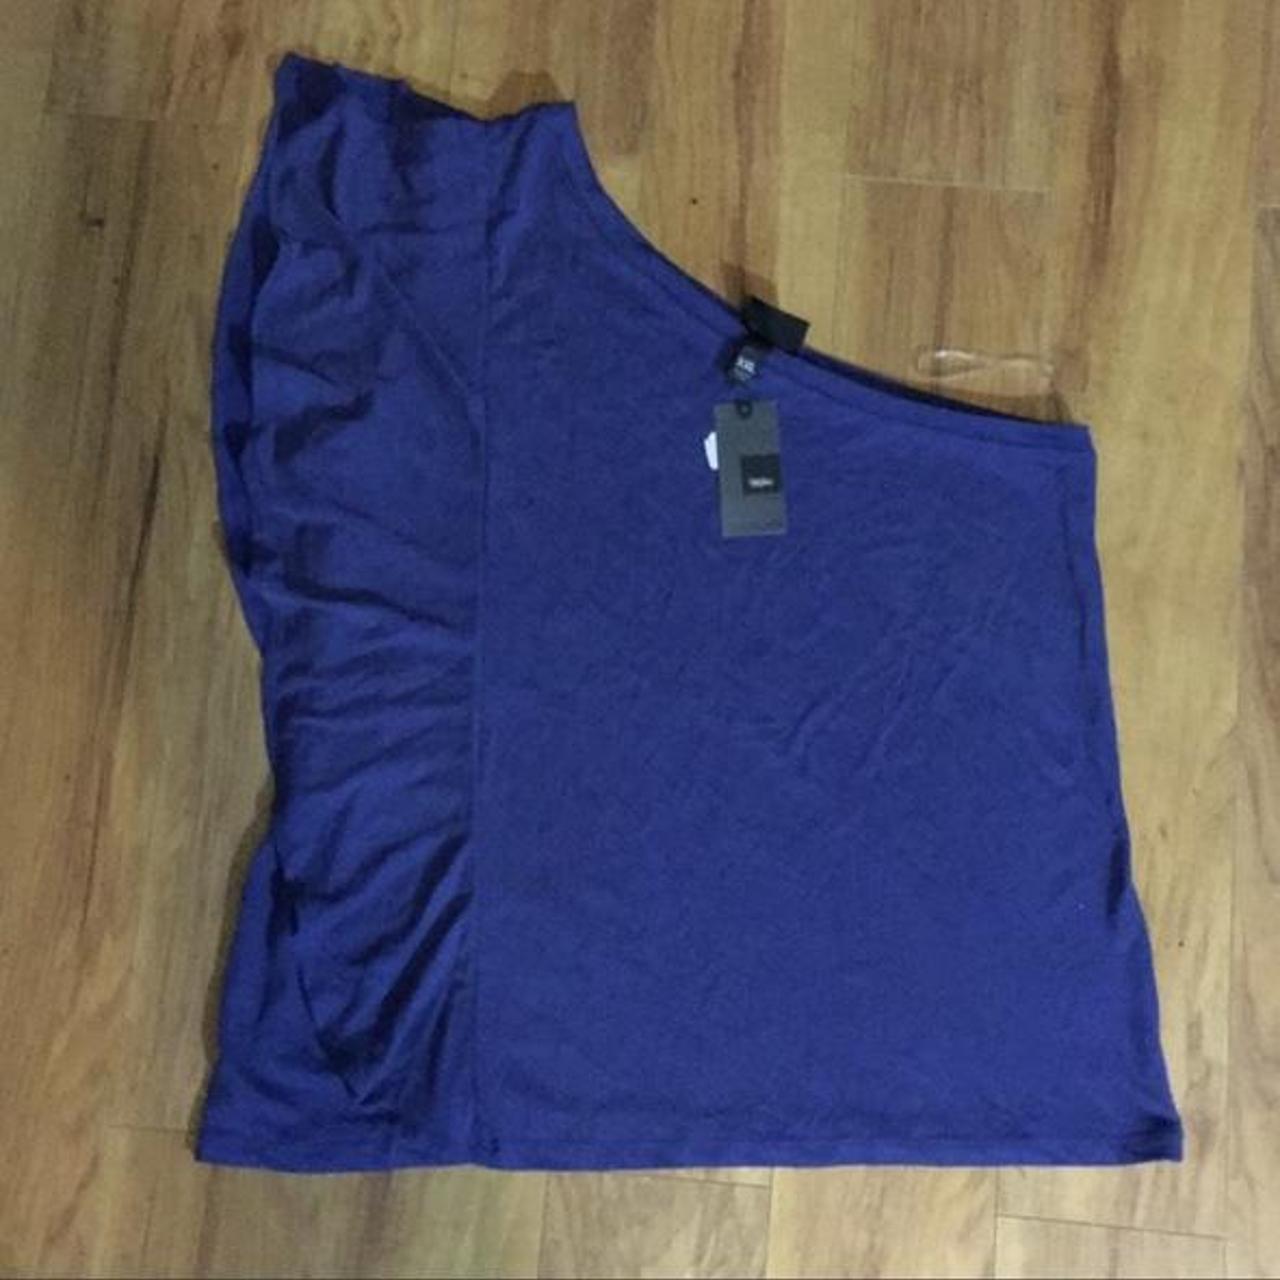 Product Image 1 - Mossimo One Shoulder Top
(NWT) Size: